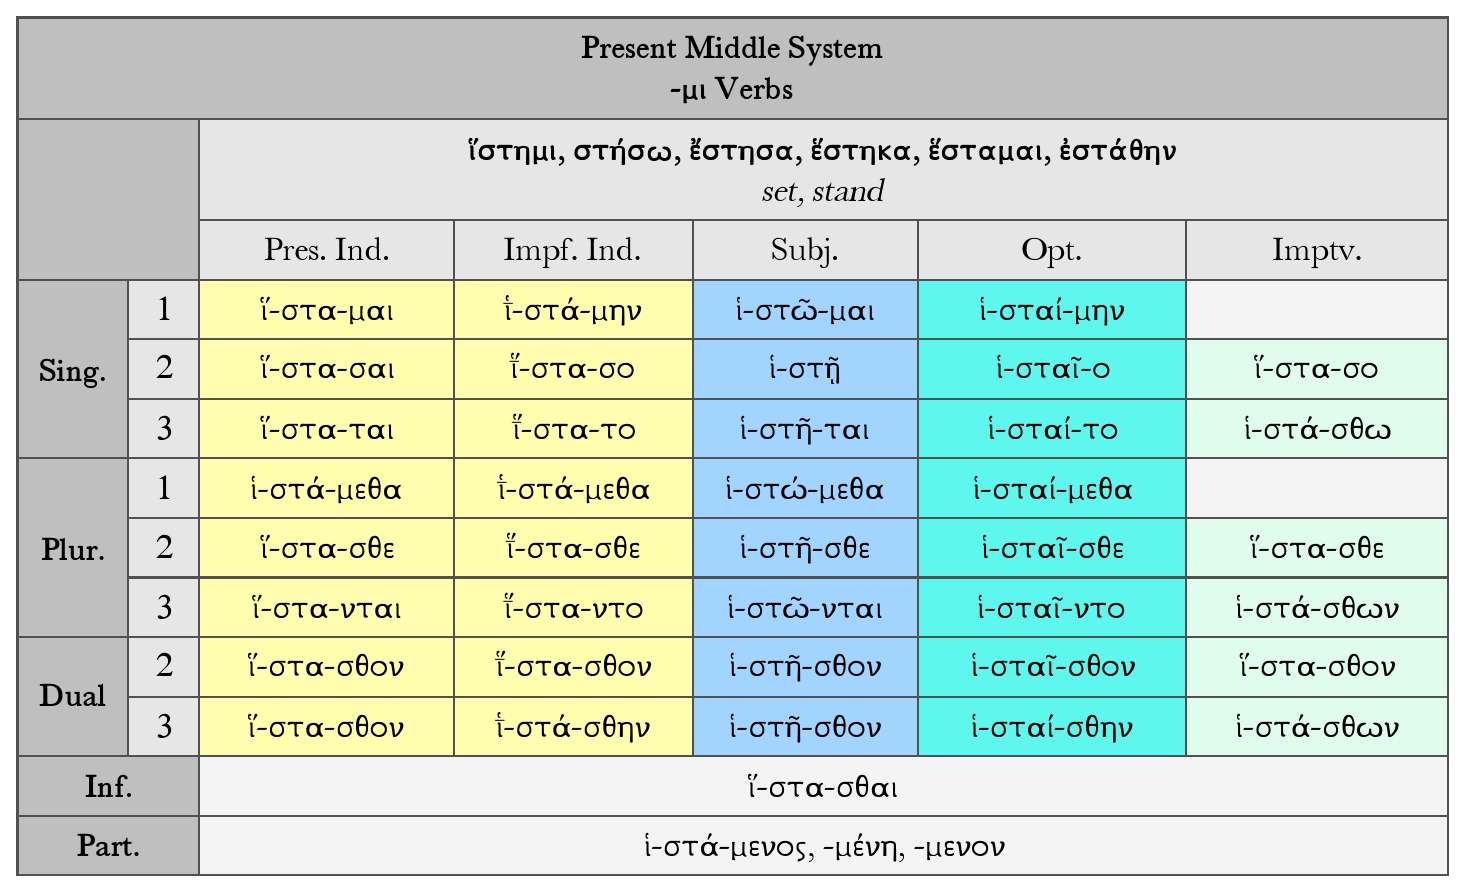 Goodell: Present Middle System Paradigm Chart for ἵστημι